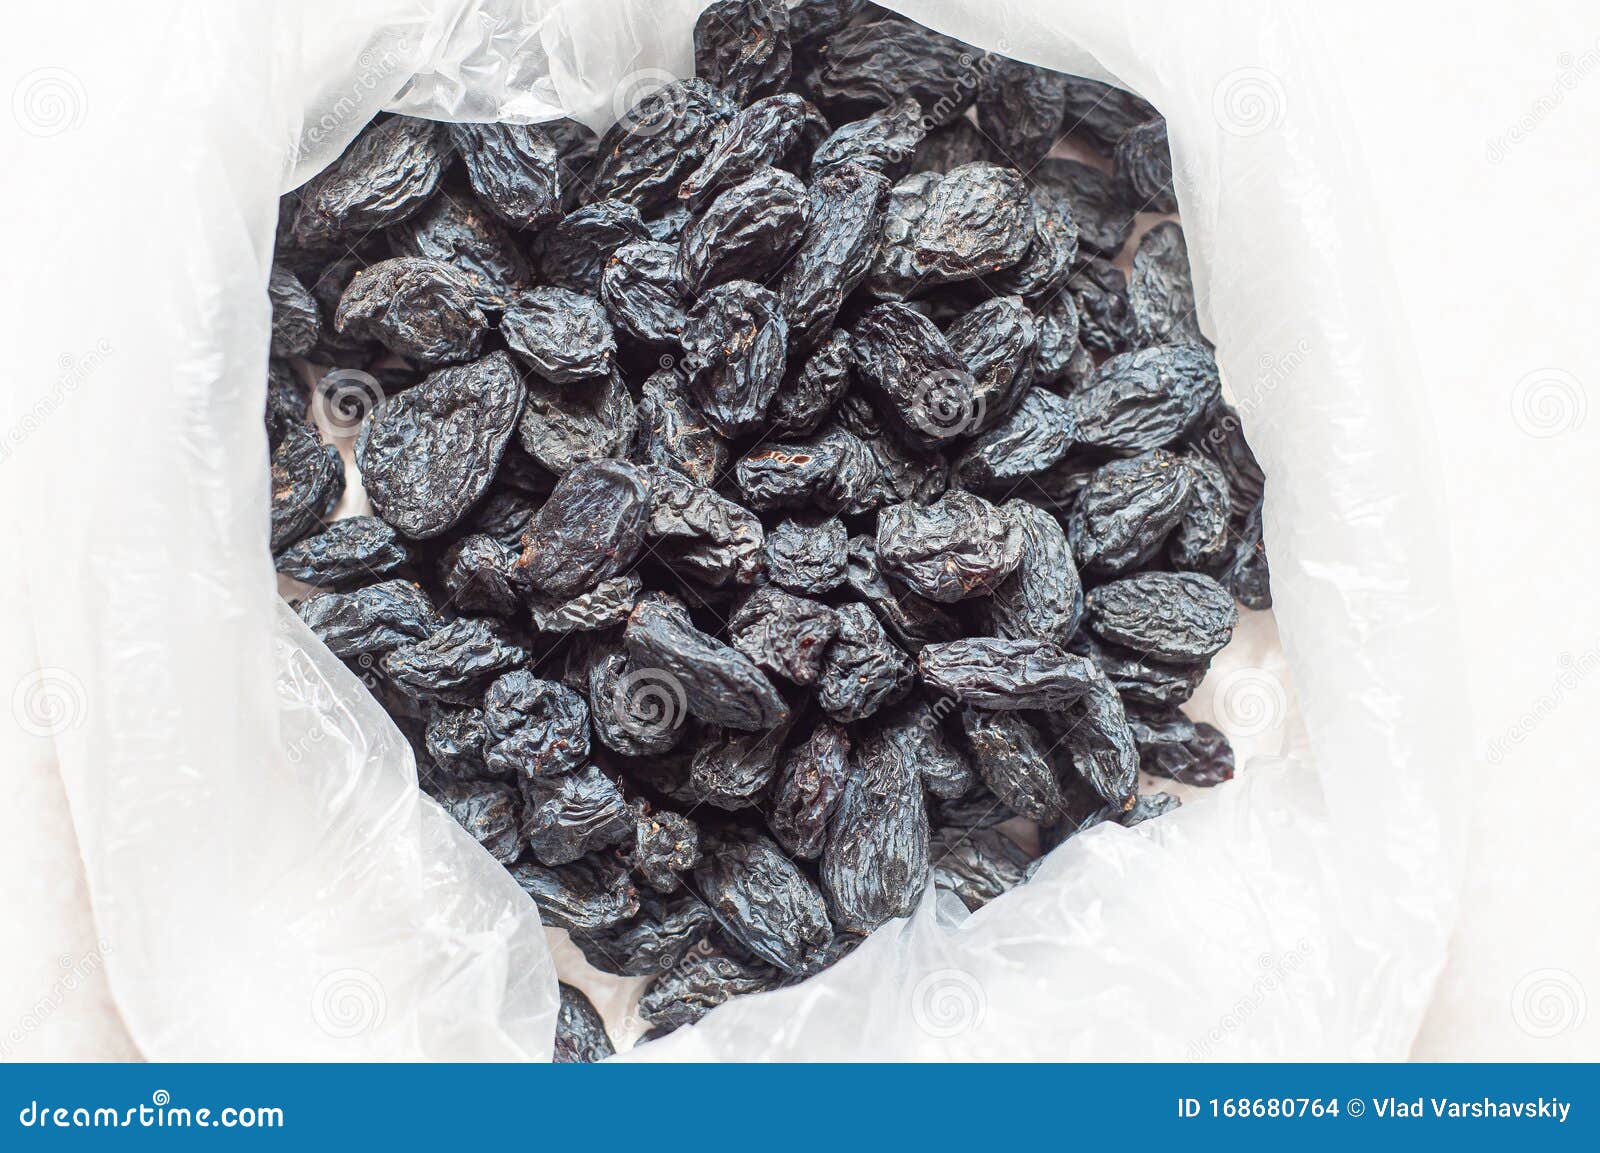 Black Dried Raisins in a Plastic Bag on a White Table. the Rate of ...